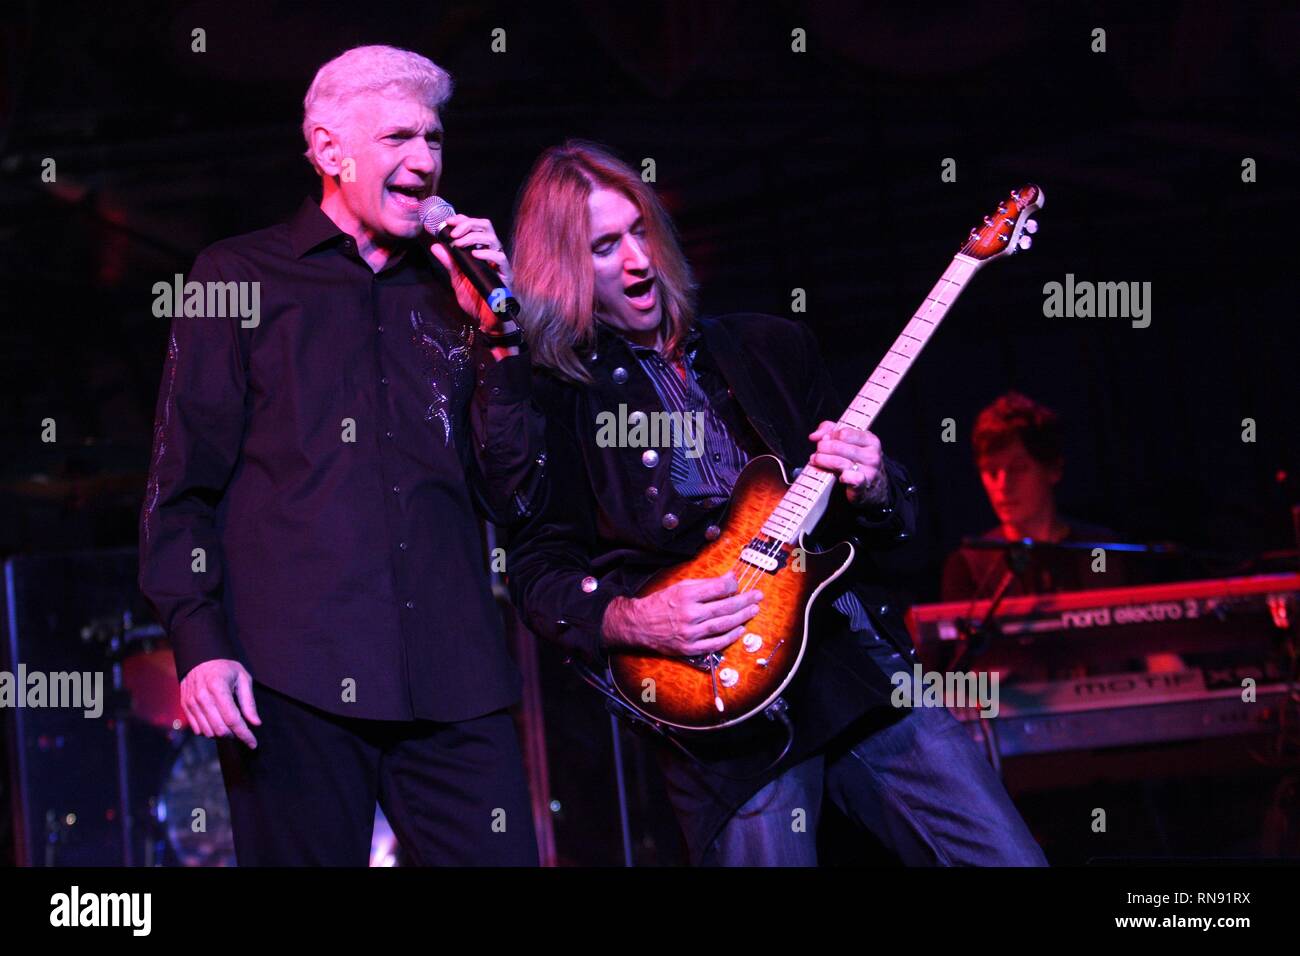 Former vocalist and keyboardist of Styx, Dennis DeYoung is shown performing on stage with his solo band during a 'live' concert appearance. Stock Photo